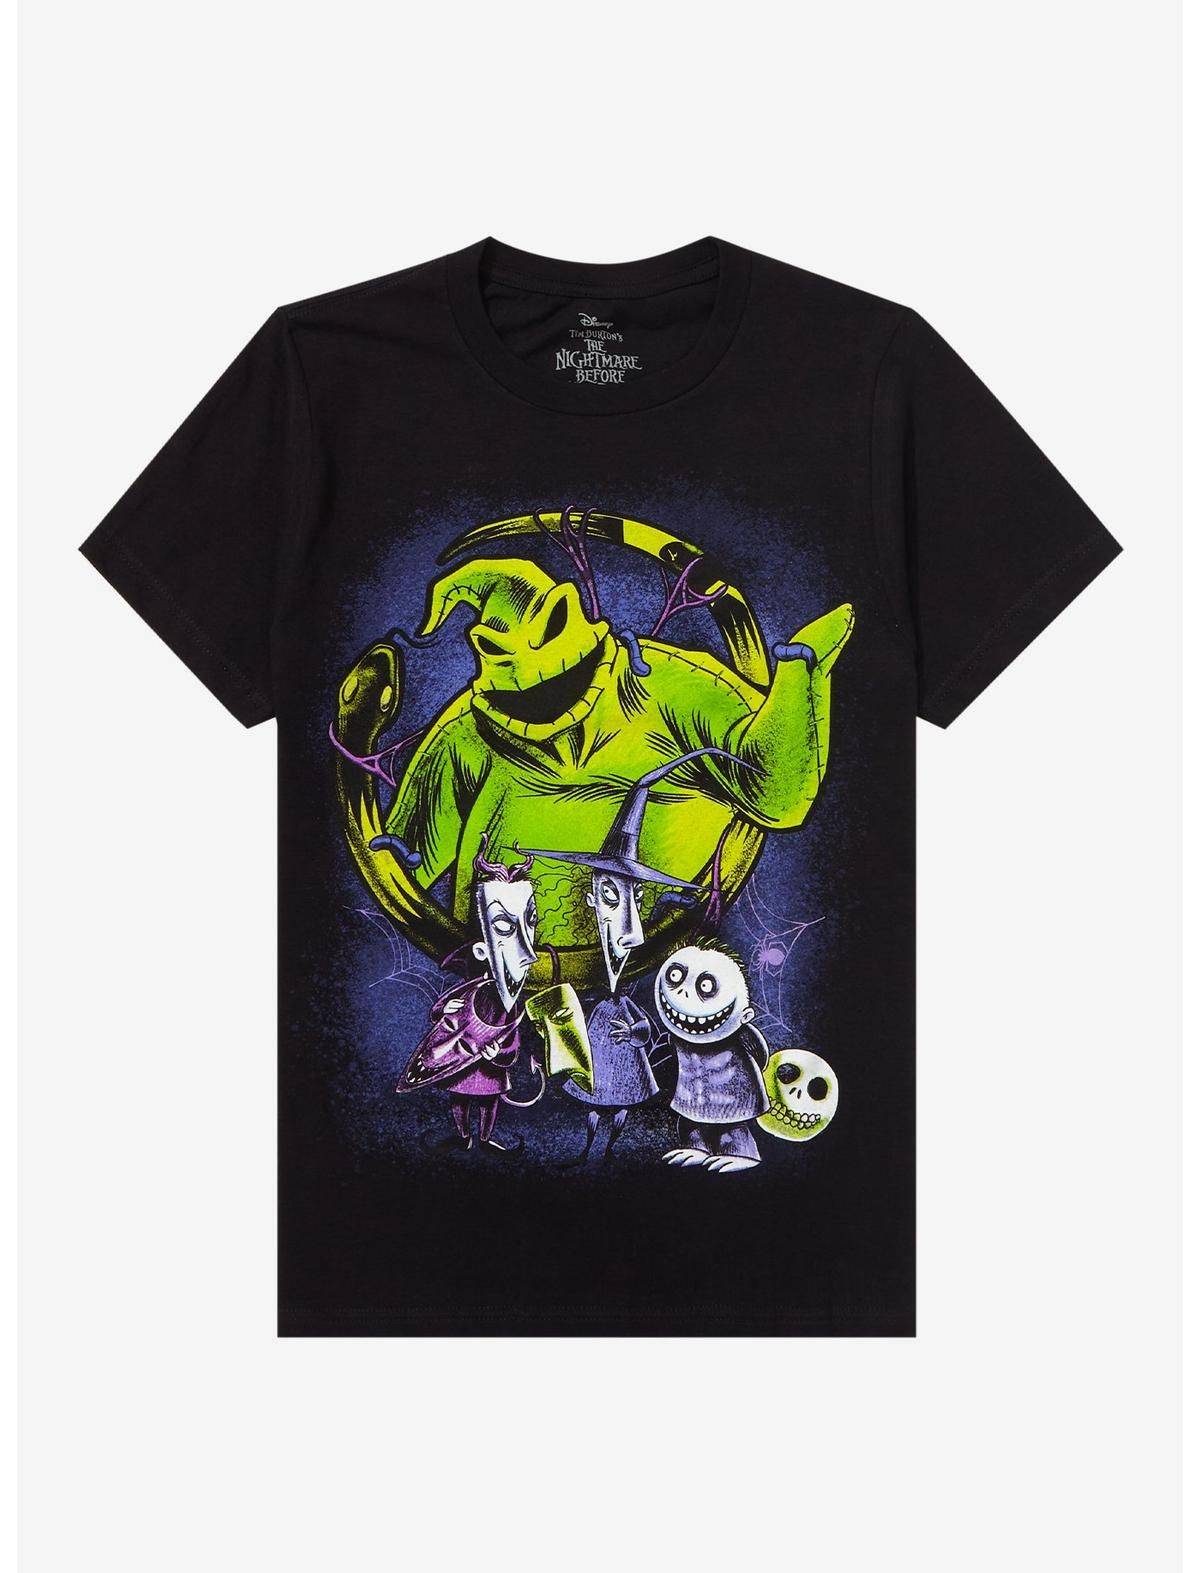 The Nightmare Before Christmas Oogie Boogie Neon Boyfriend Fit Girls T-Shirt | Hot Topic | Hot Topic